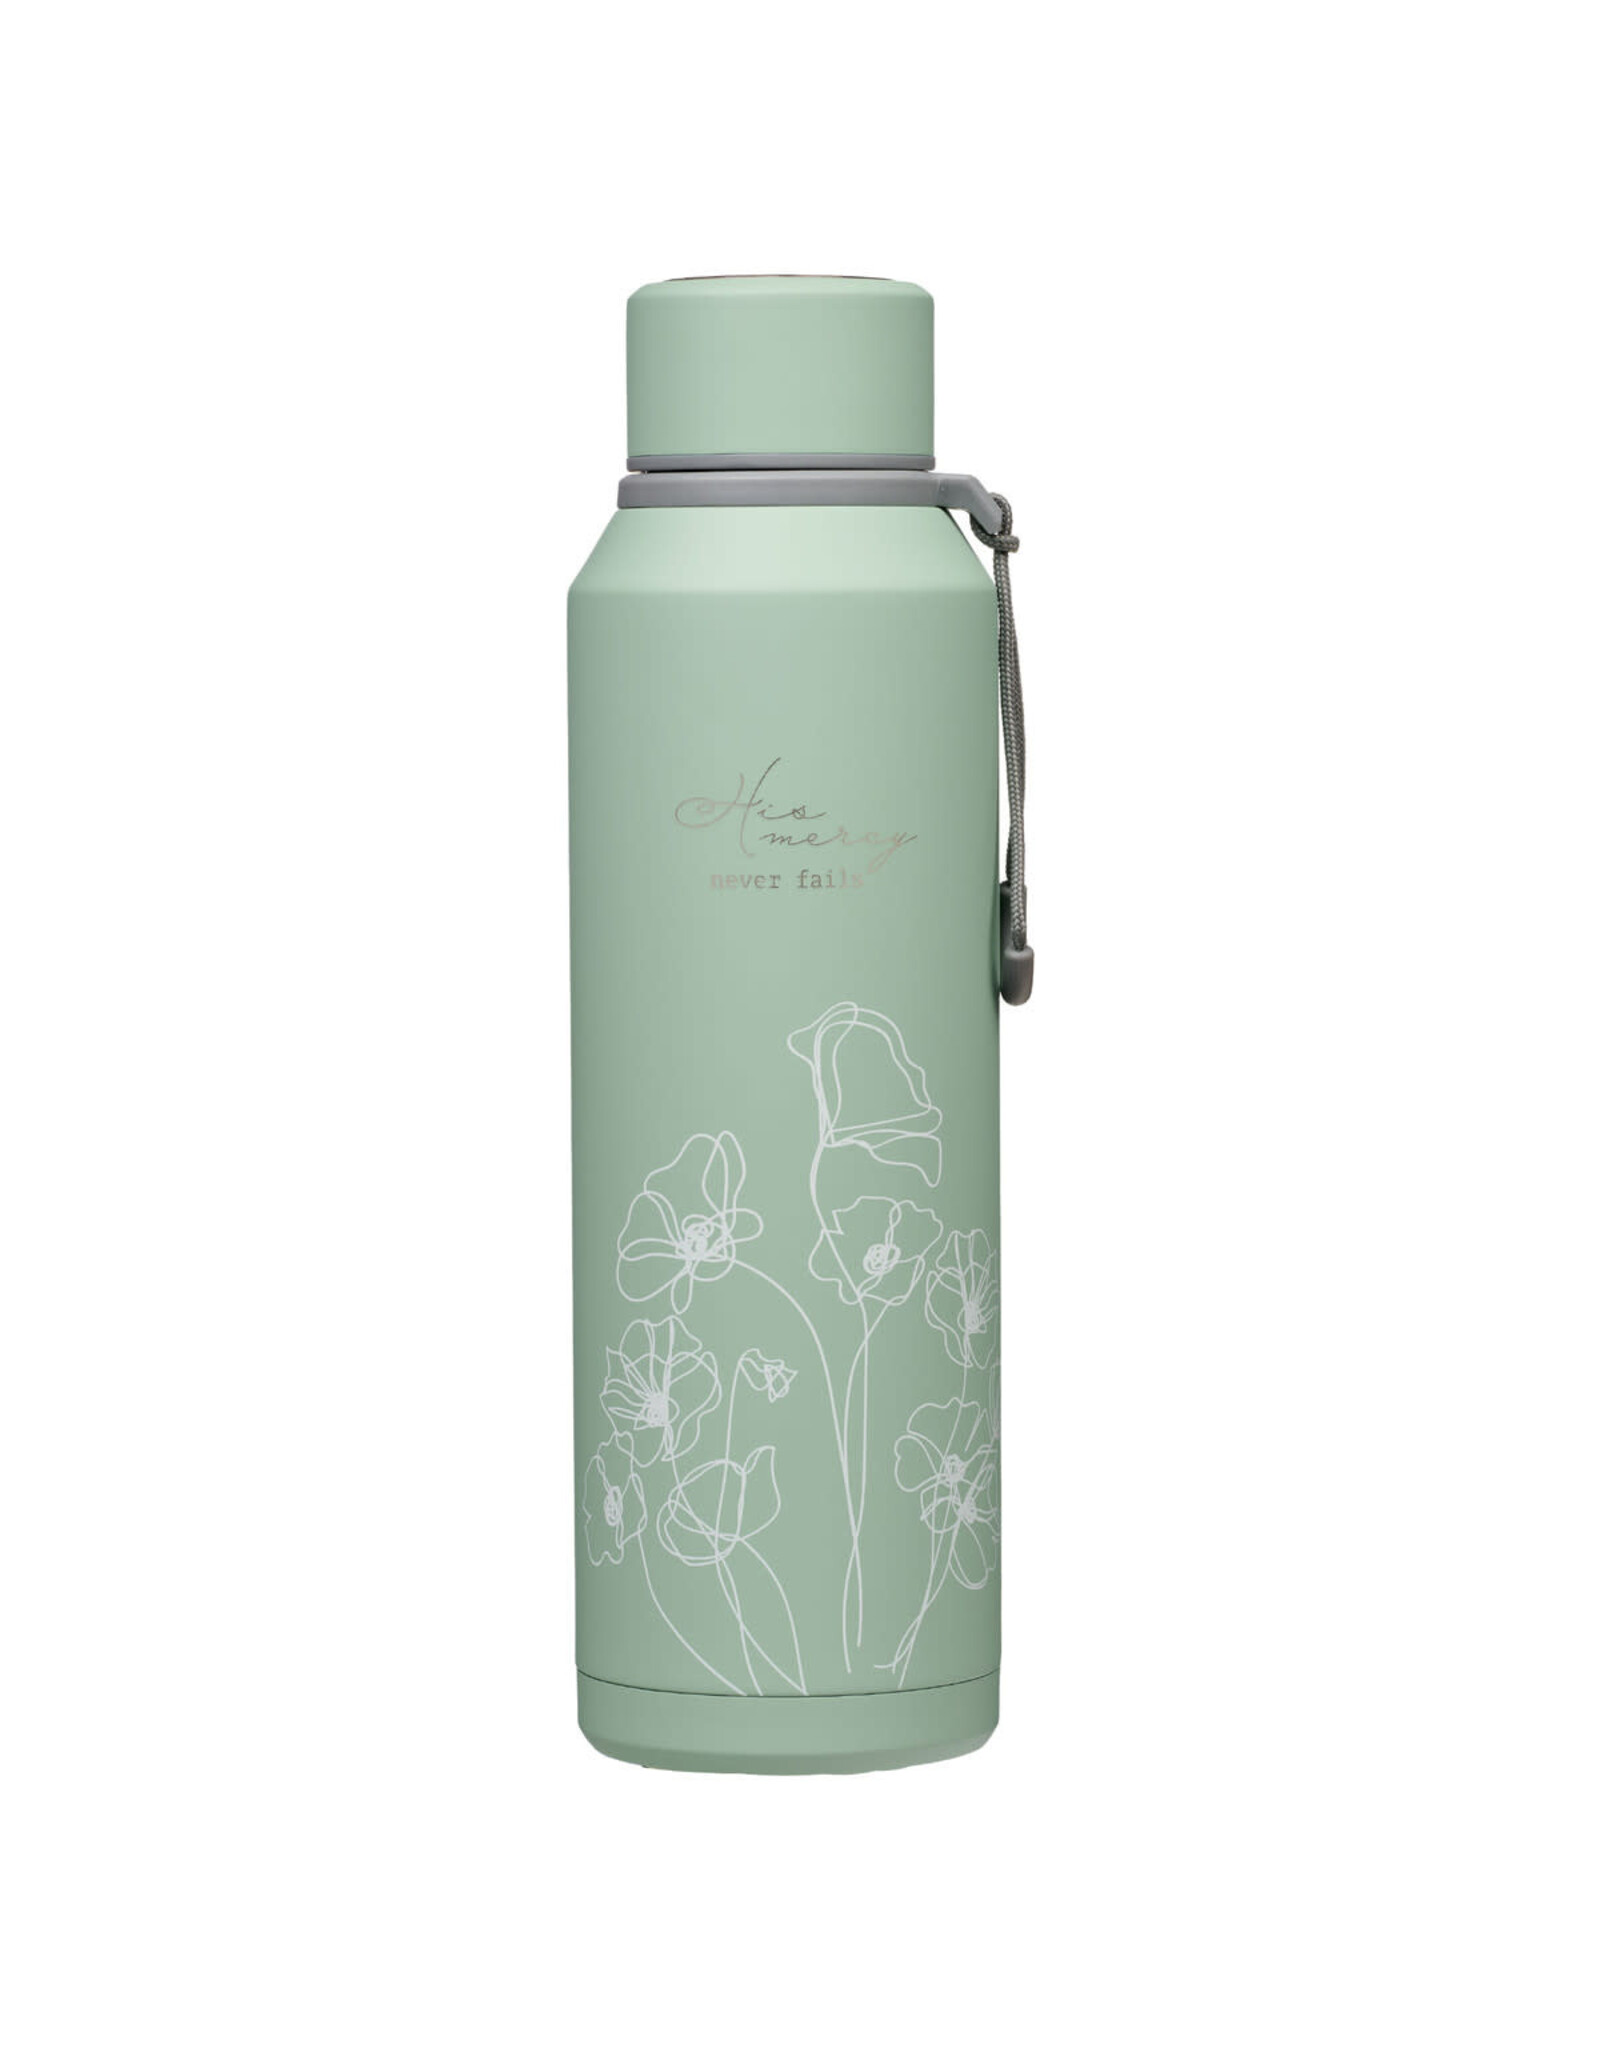 Christian Art Gifts Water Bottle - Mercy, Hazy Teal Stainless Steel